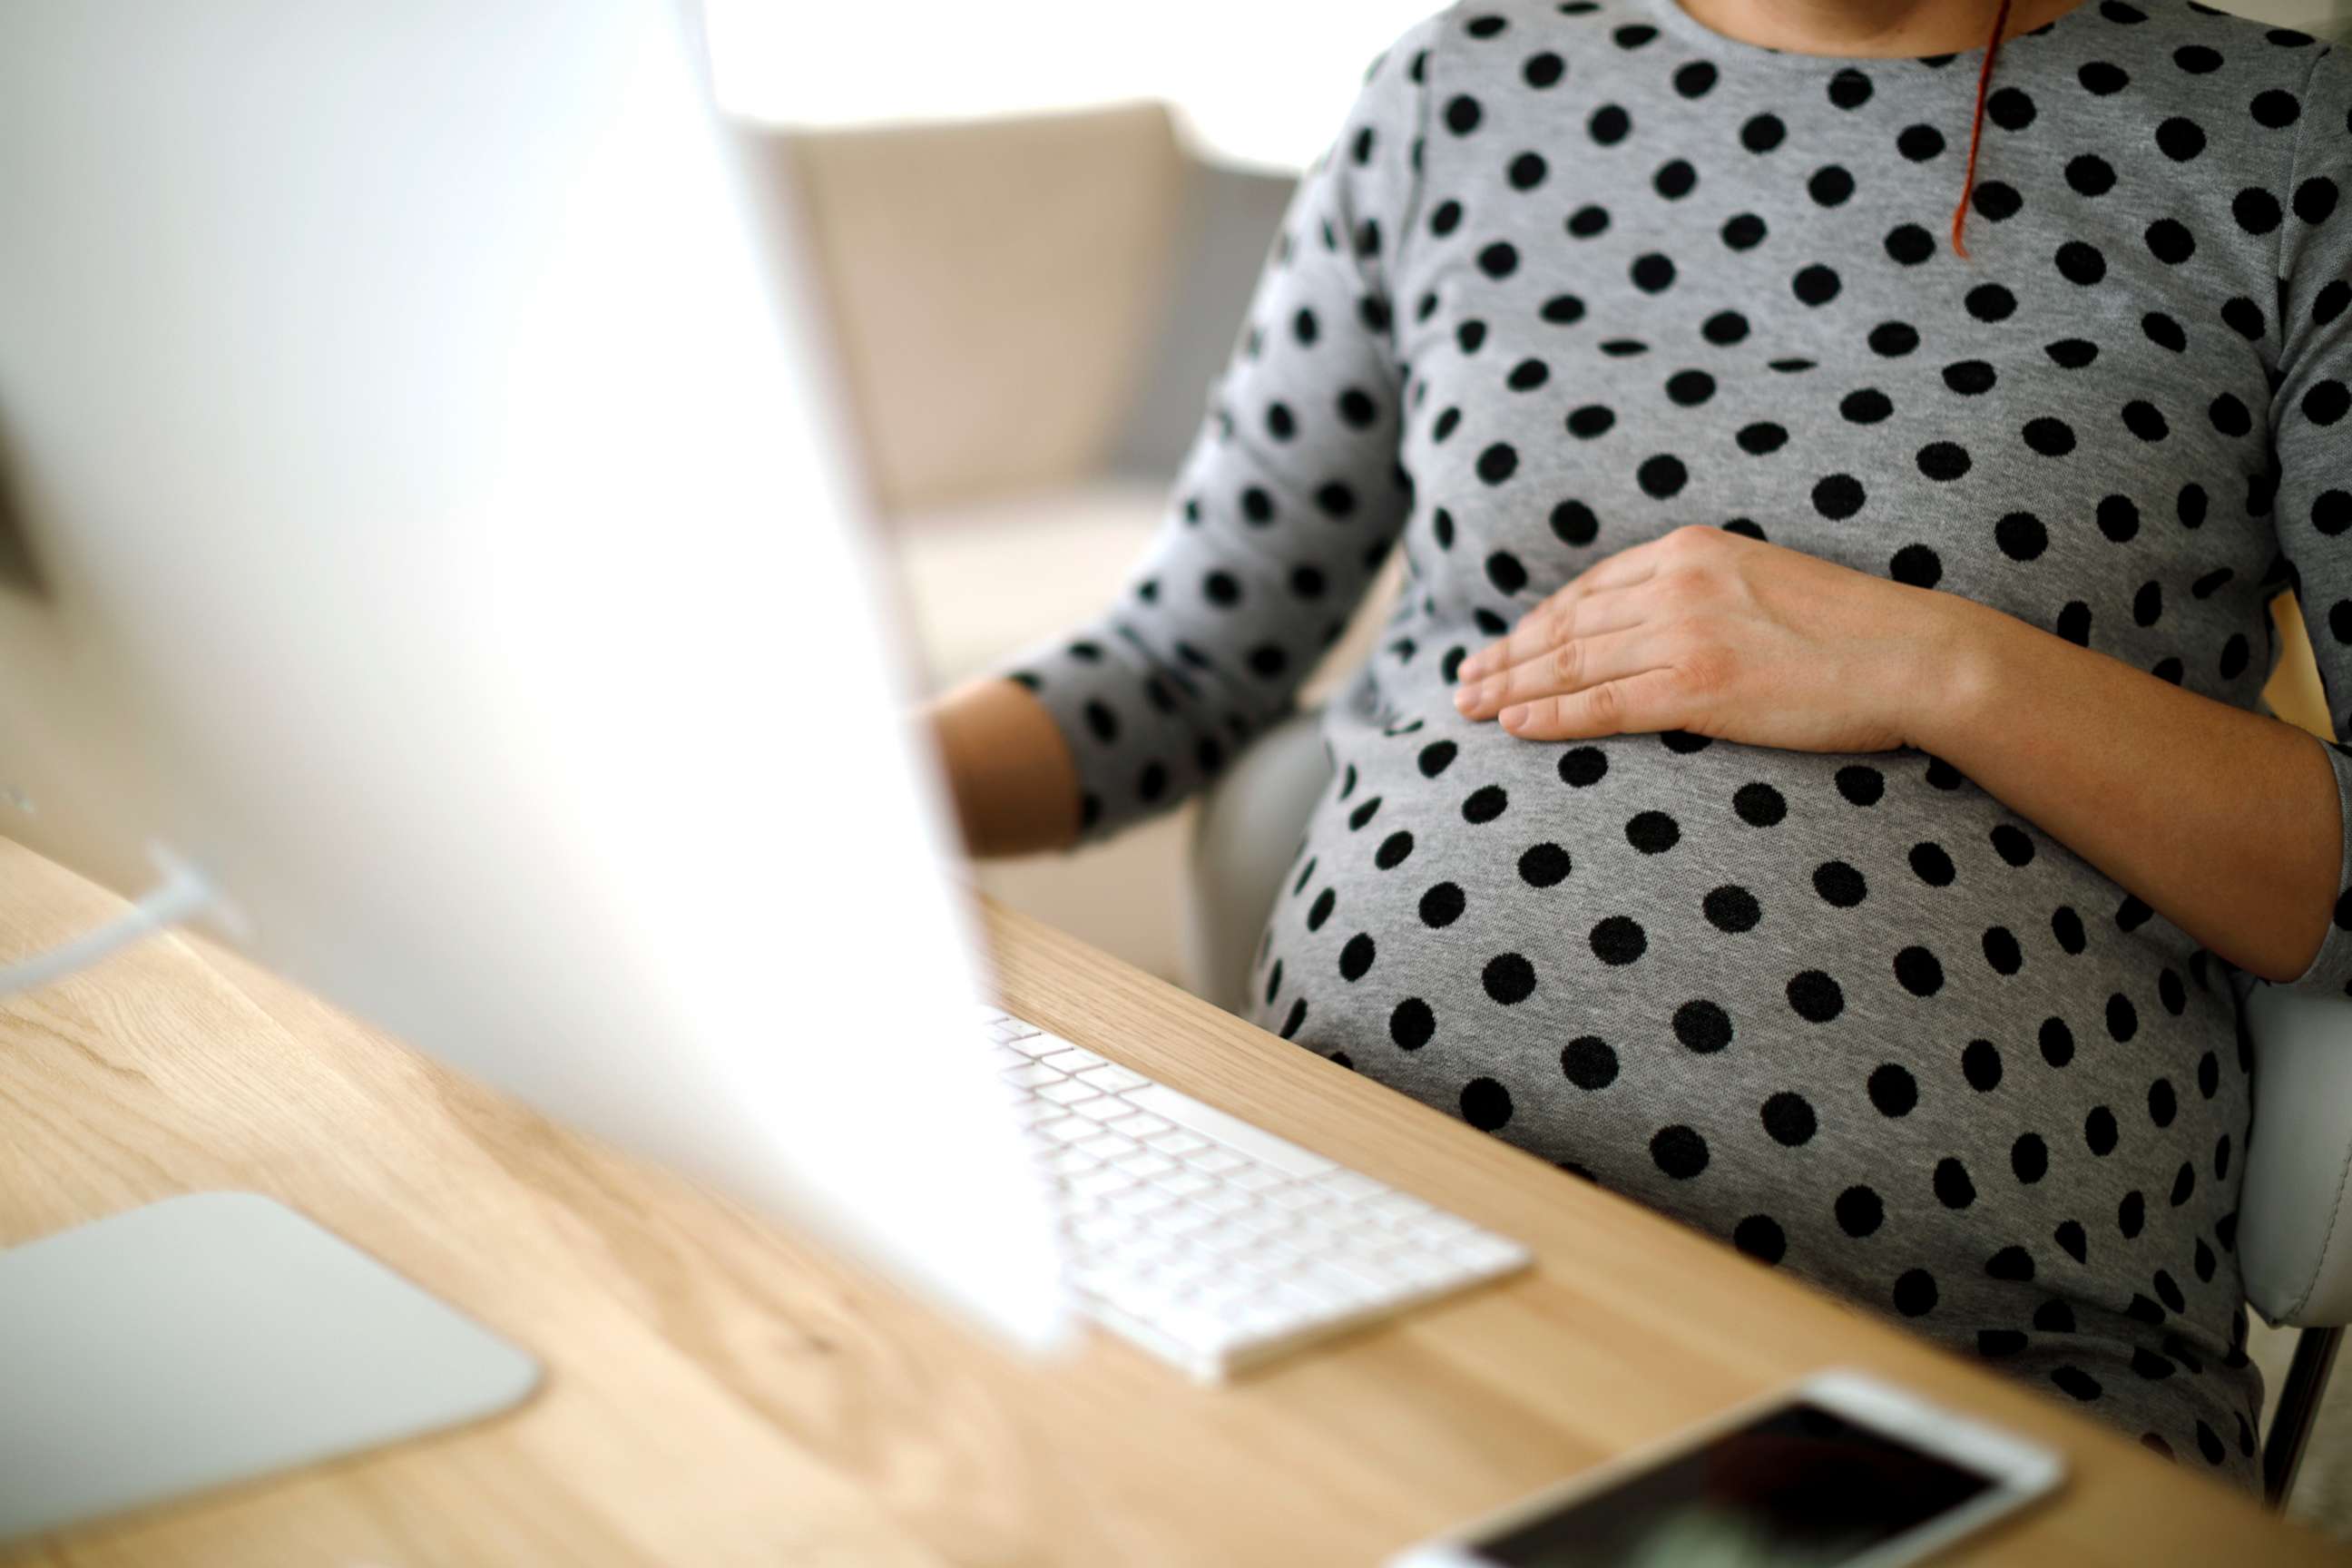 PHOTO: A pregnant woman works at an office.